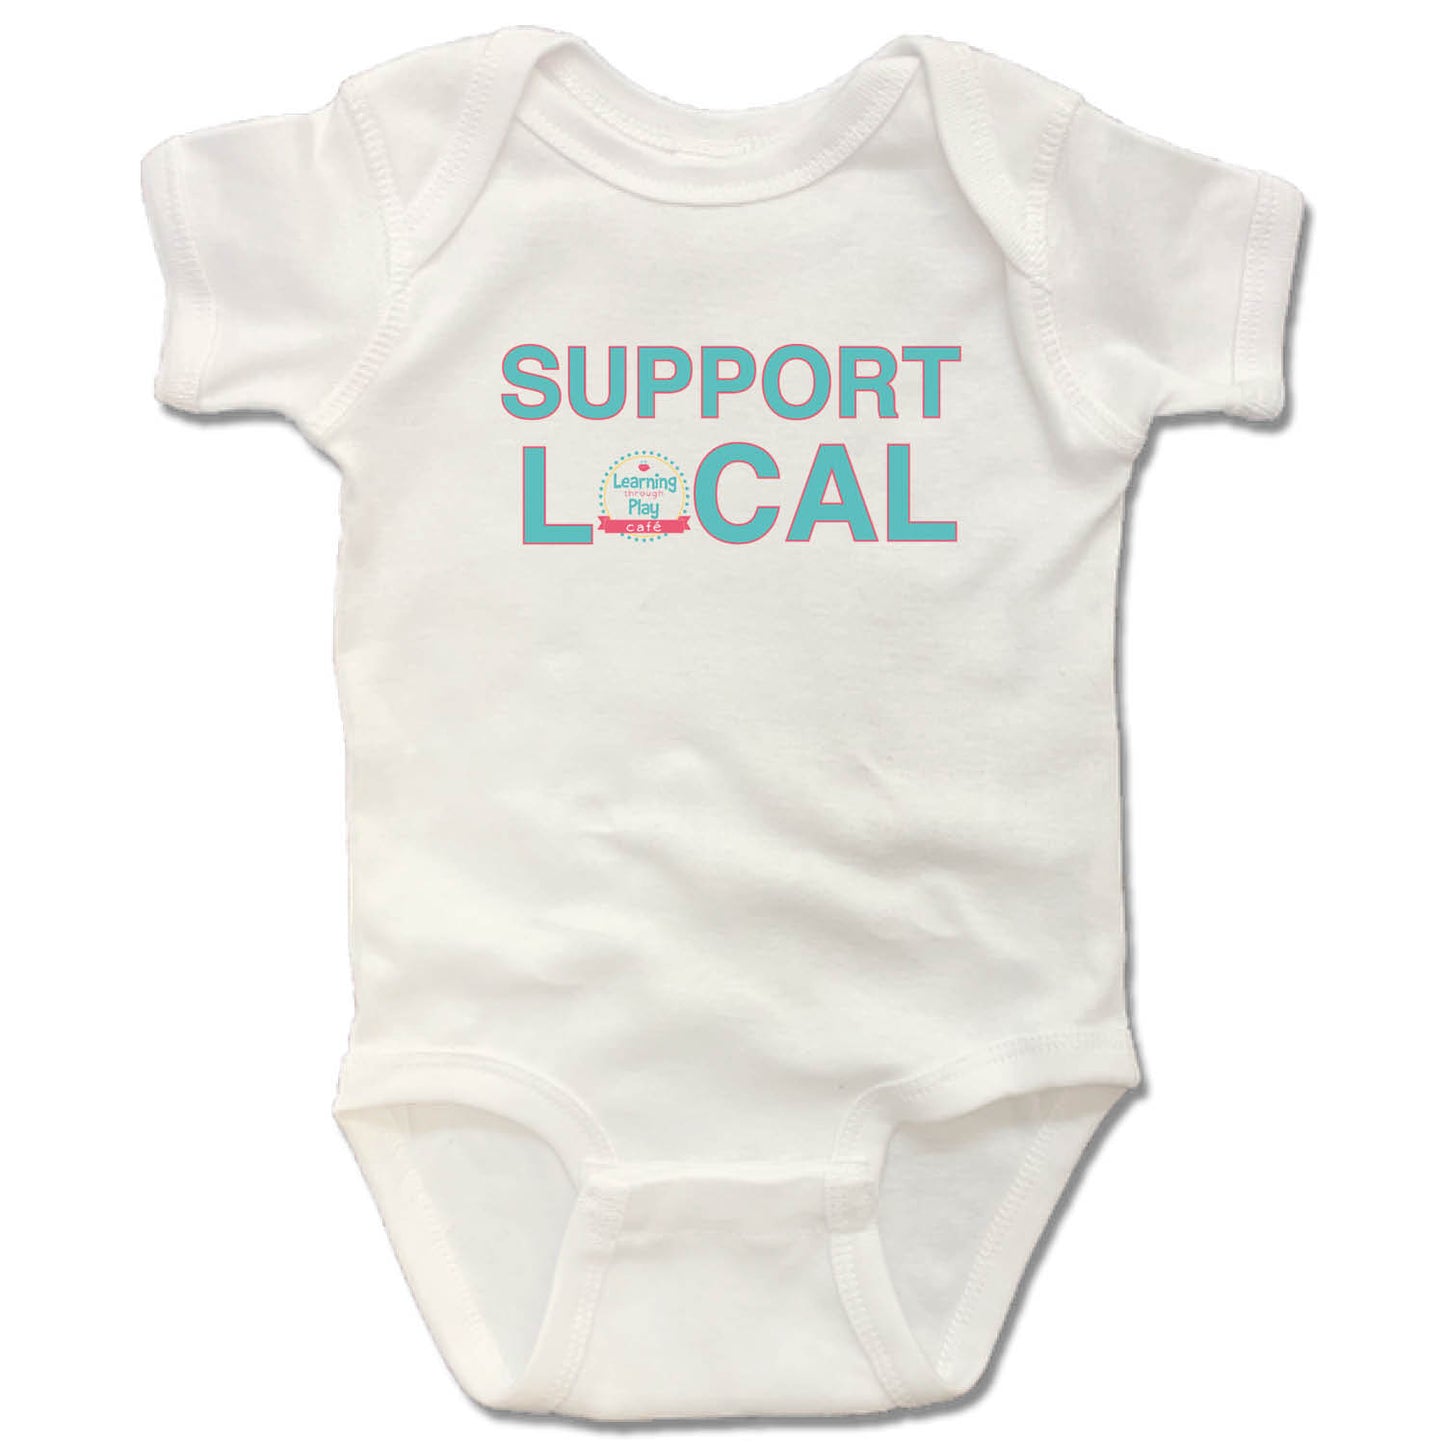 LEARNING THROUGH PLAY | WHITE ONESIE | SUPPORT LOCAL